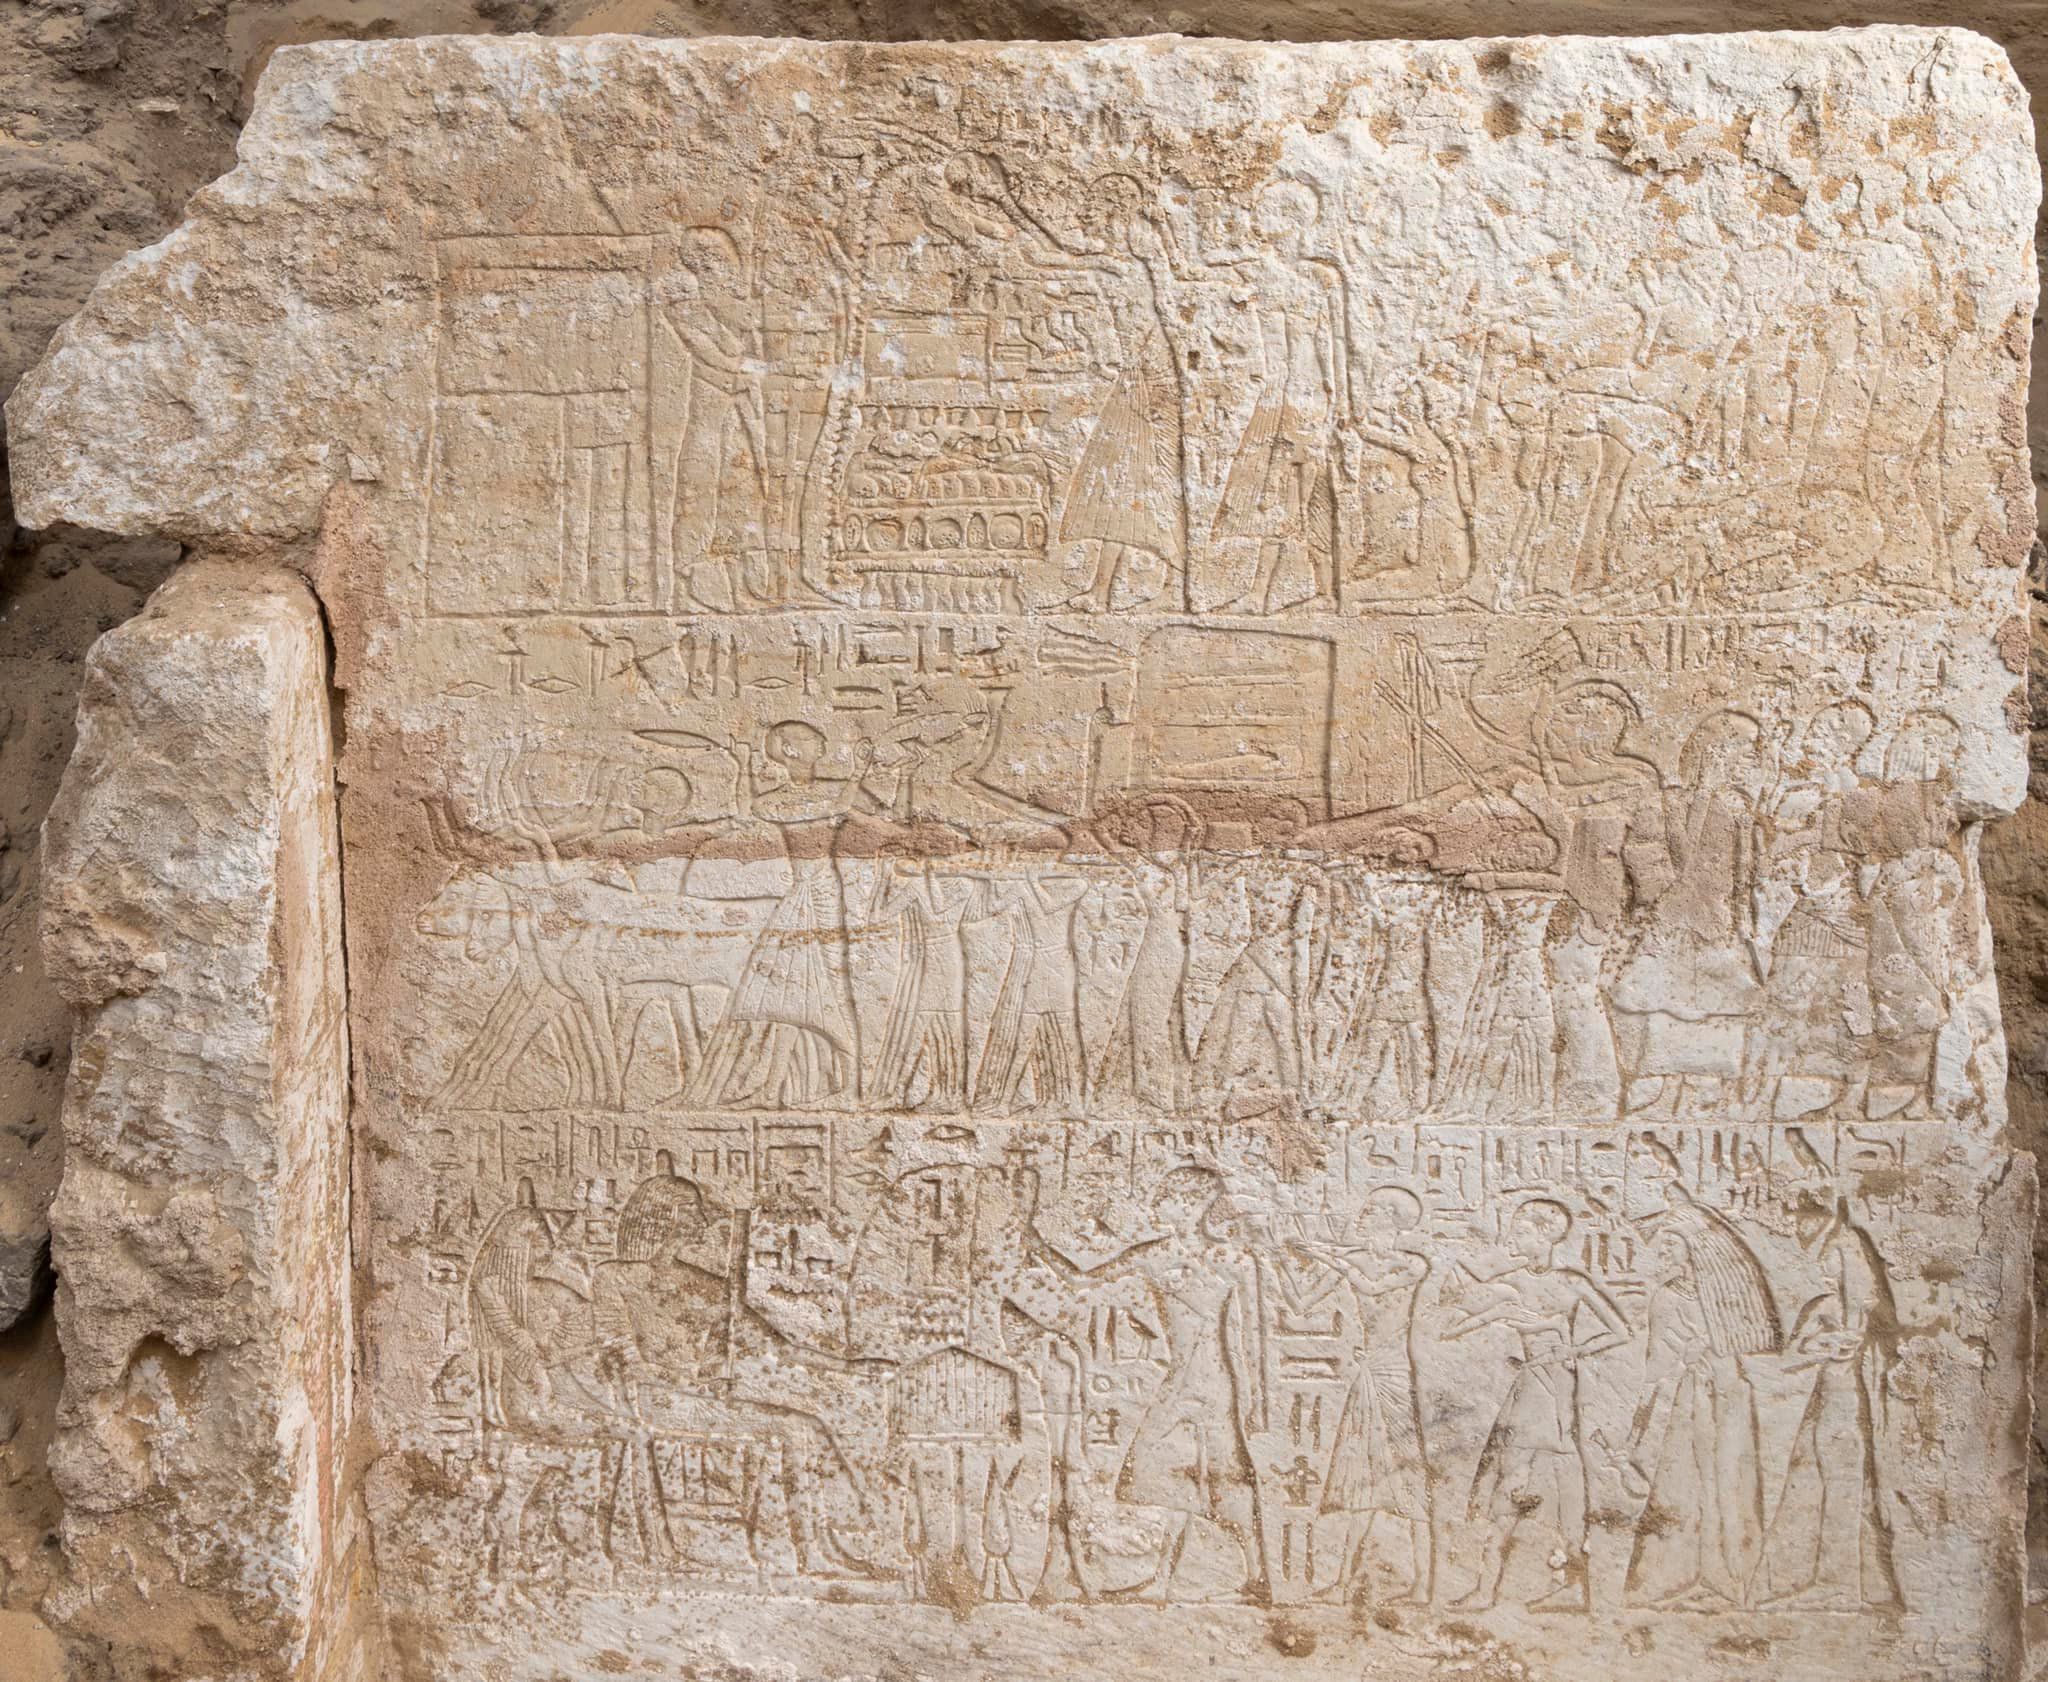 dutch museum hopes to change egyptian government's position on saqqara excavation ban